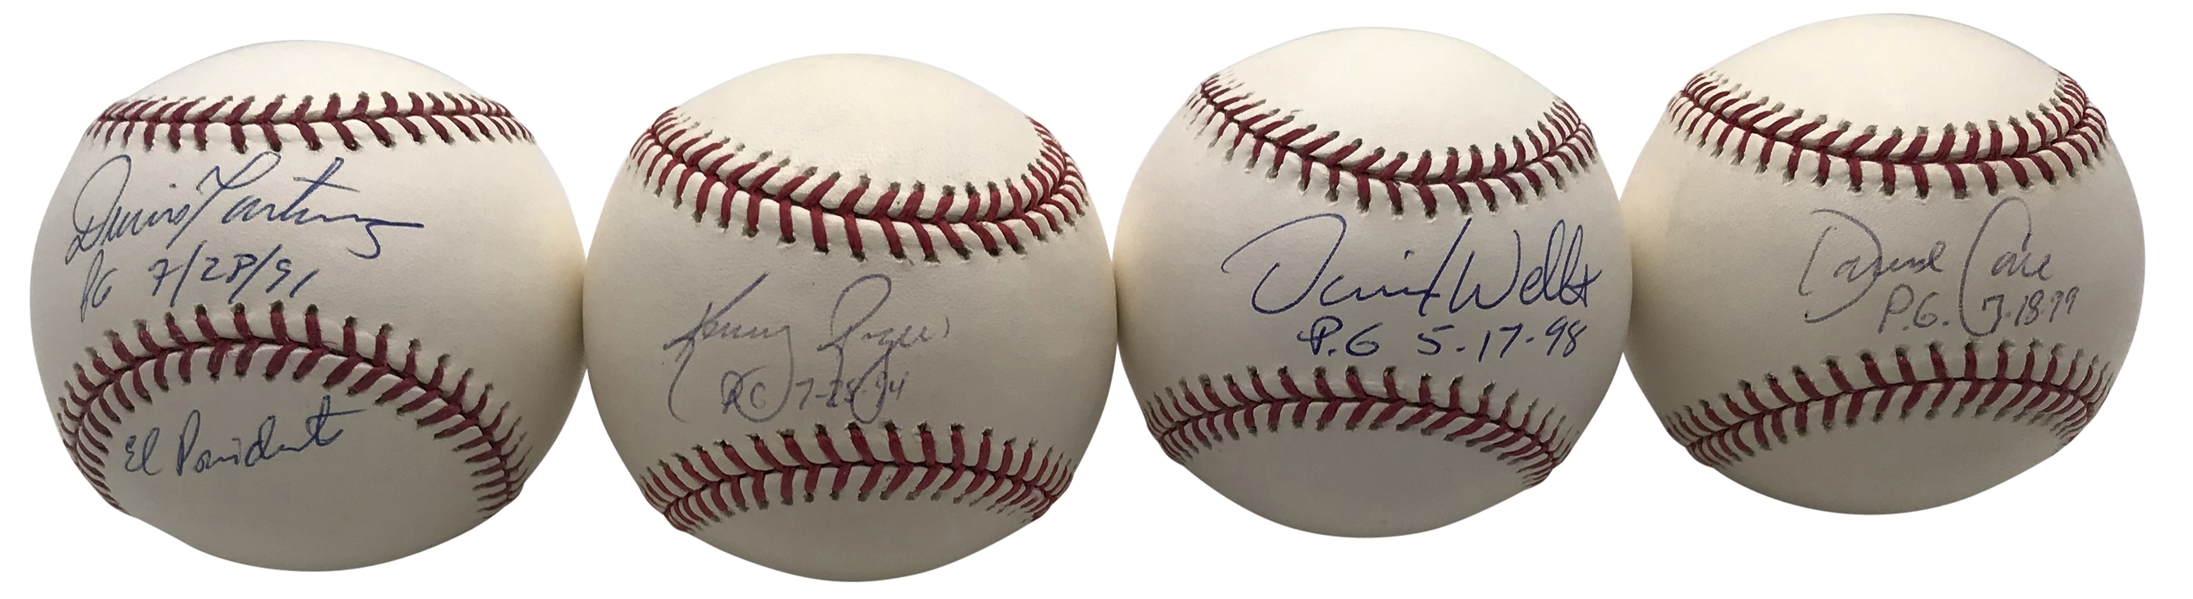 1990s Perfect Game Pitchers Lot of Four (4) Signed & Inscribed Baseballs w/ Cone, Wells, Rodgers & Martínez! (Beckett/BAS Guaranteed)